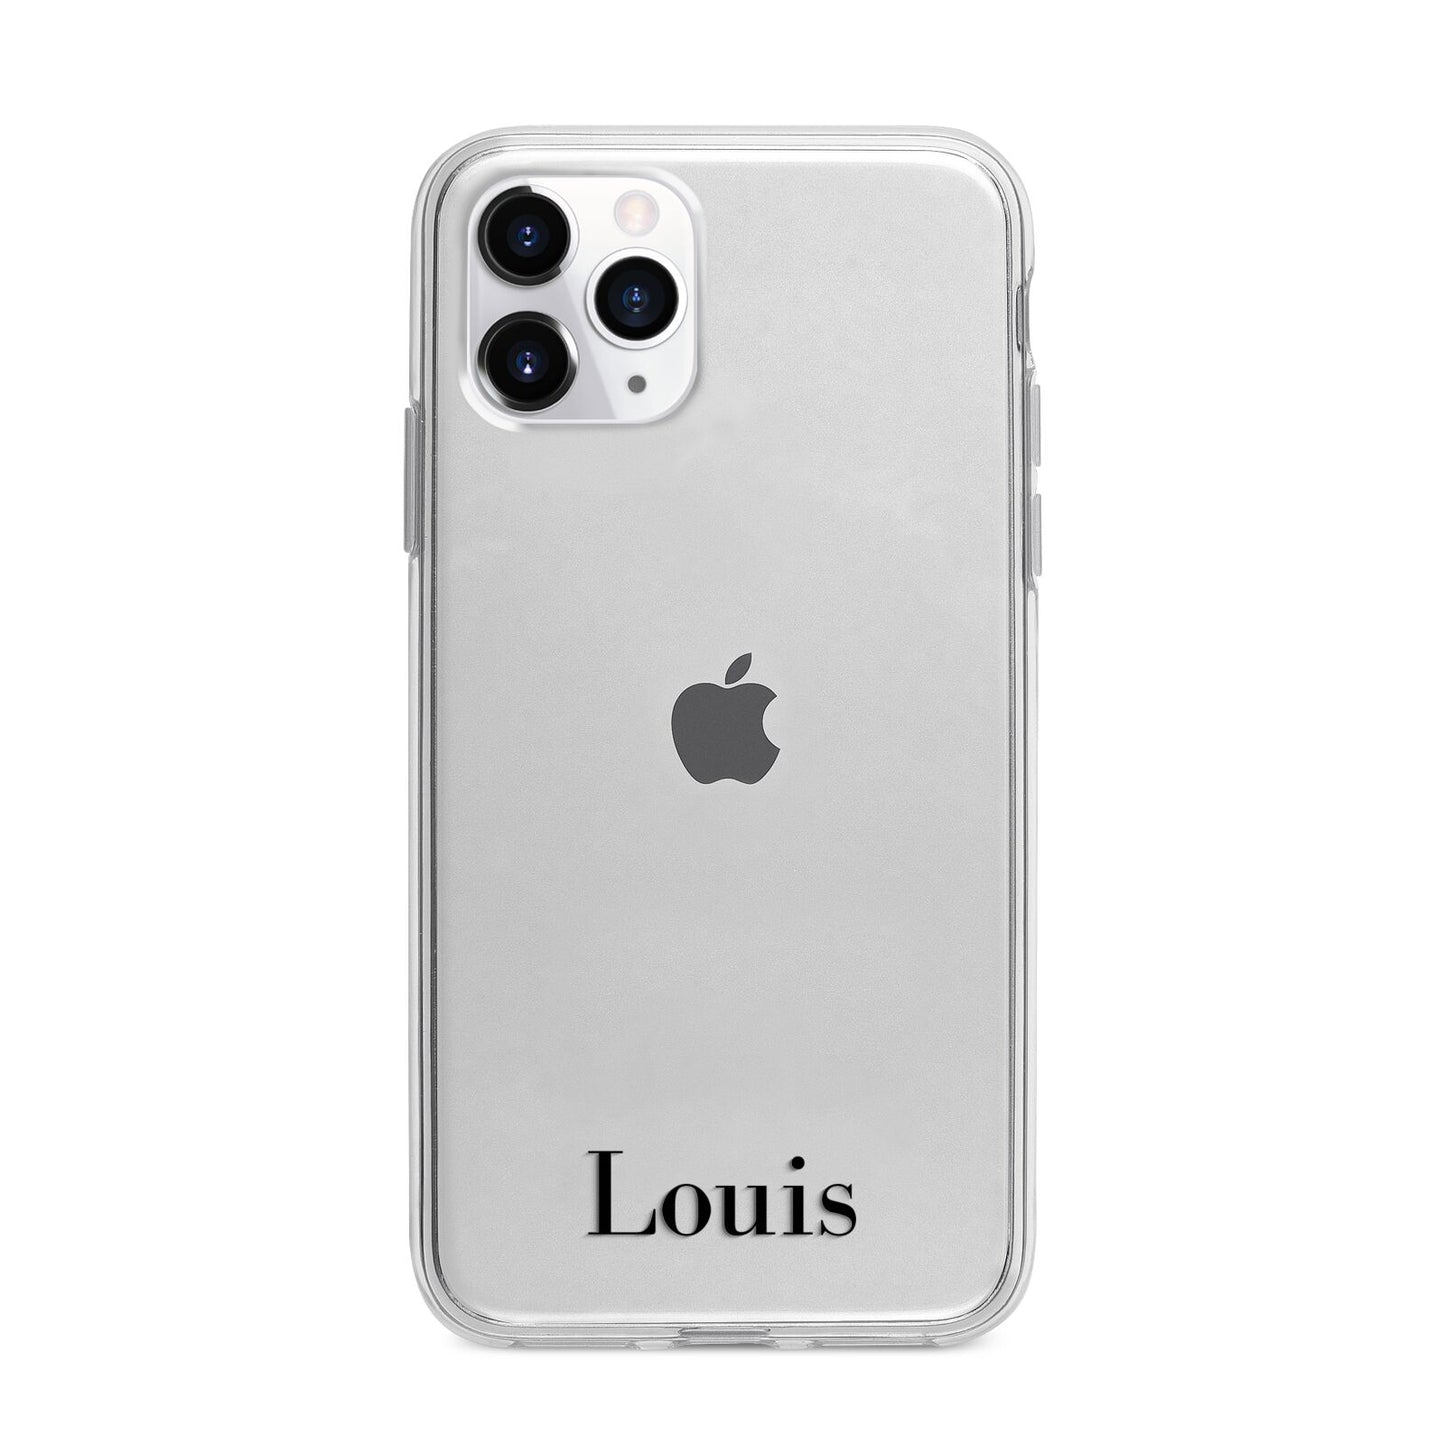 Name Apple iPhone 11 Pro Max in Silver with Bumper Case